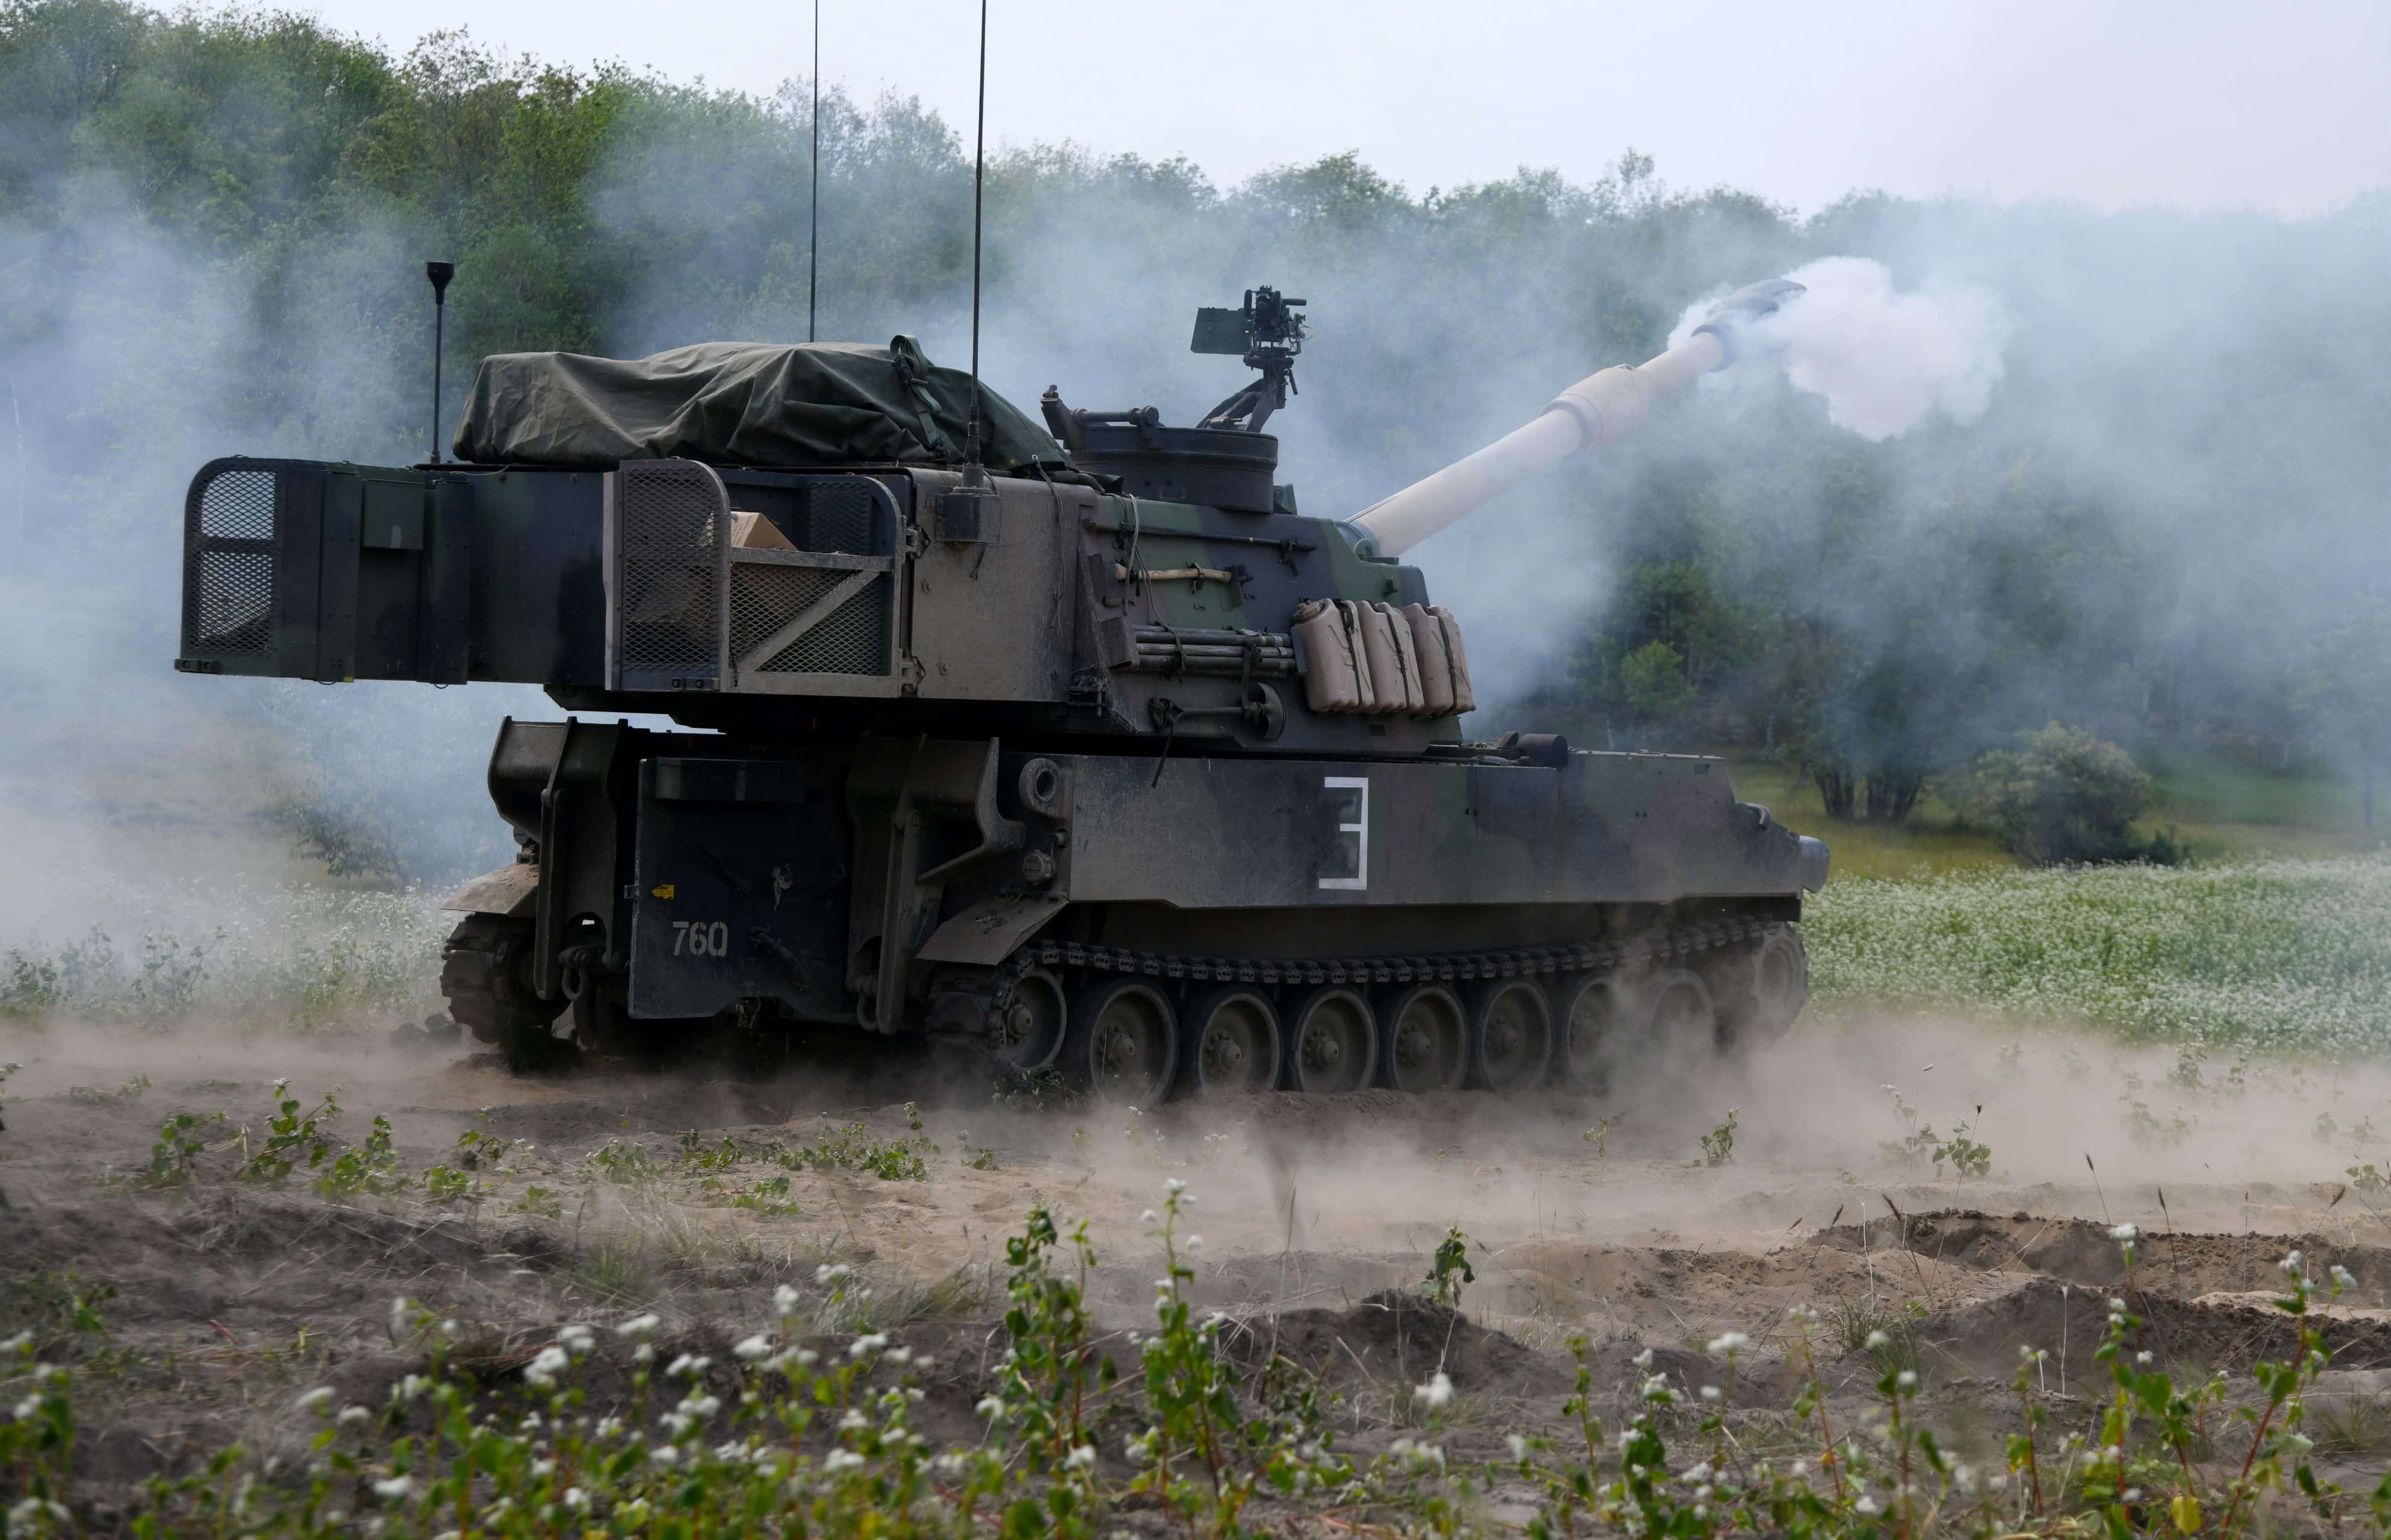 A M109A6 Paladin Self-Propelled Howitzer from the 1st Battalion, 201st Field Artillery Regiment (1-201st FA BN), West Virginia Army National Guard, fires during Northern Strike (NS) 21-2 at the Camp Grayling Joint Maneuver Training Center, Grayling, Michigan, Aug. 3, 2021.